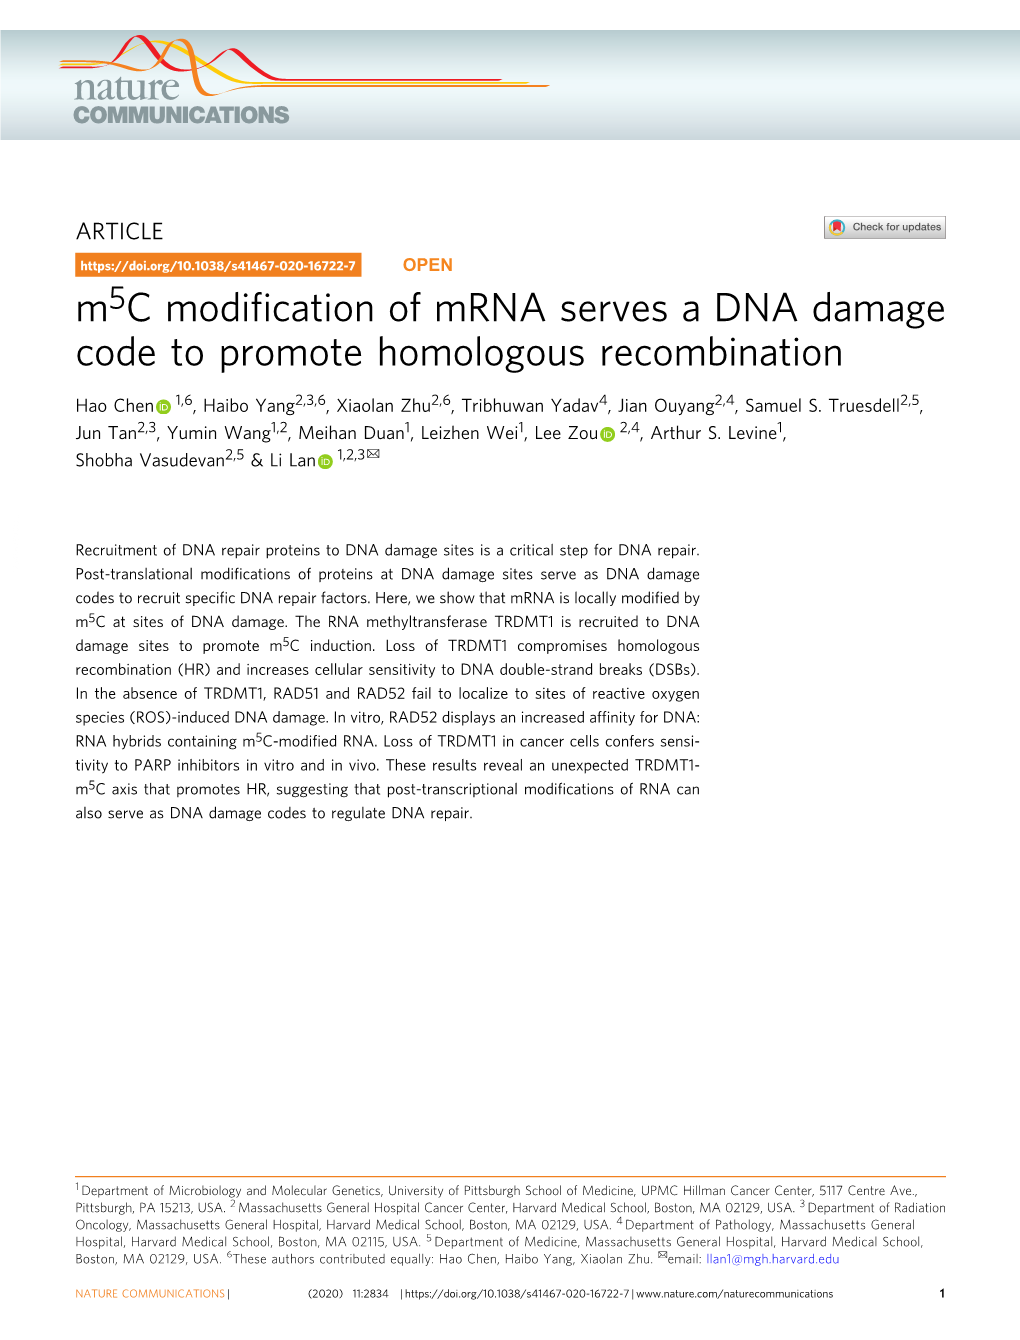 M5c Modification of Mrna Serves a DNA Damage Code to Promote